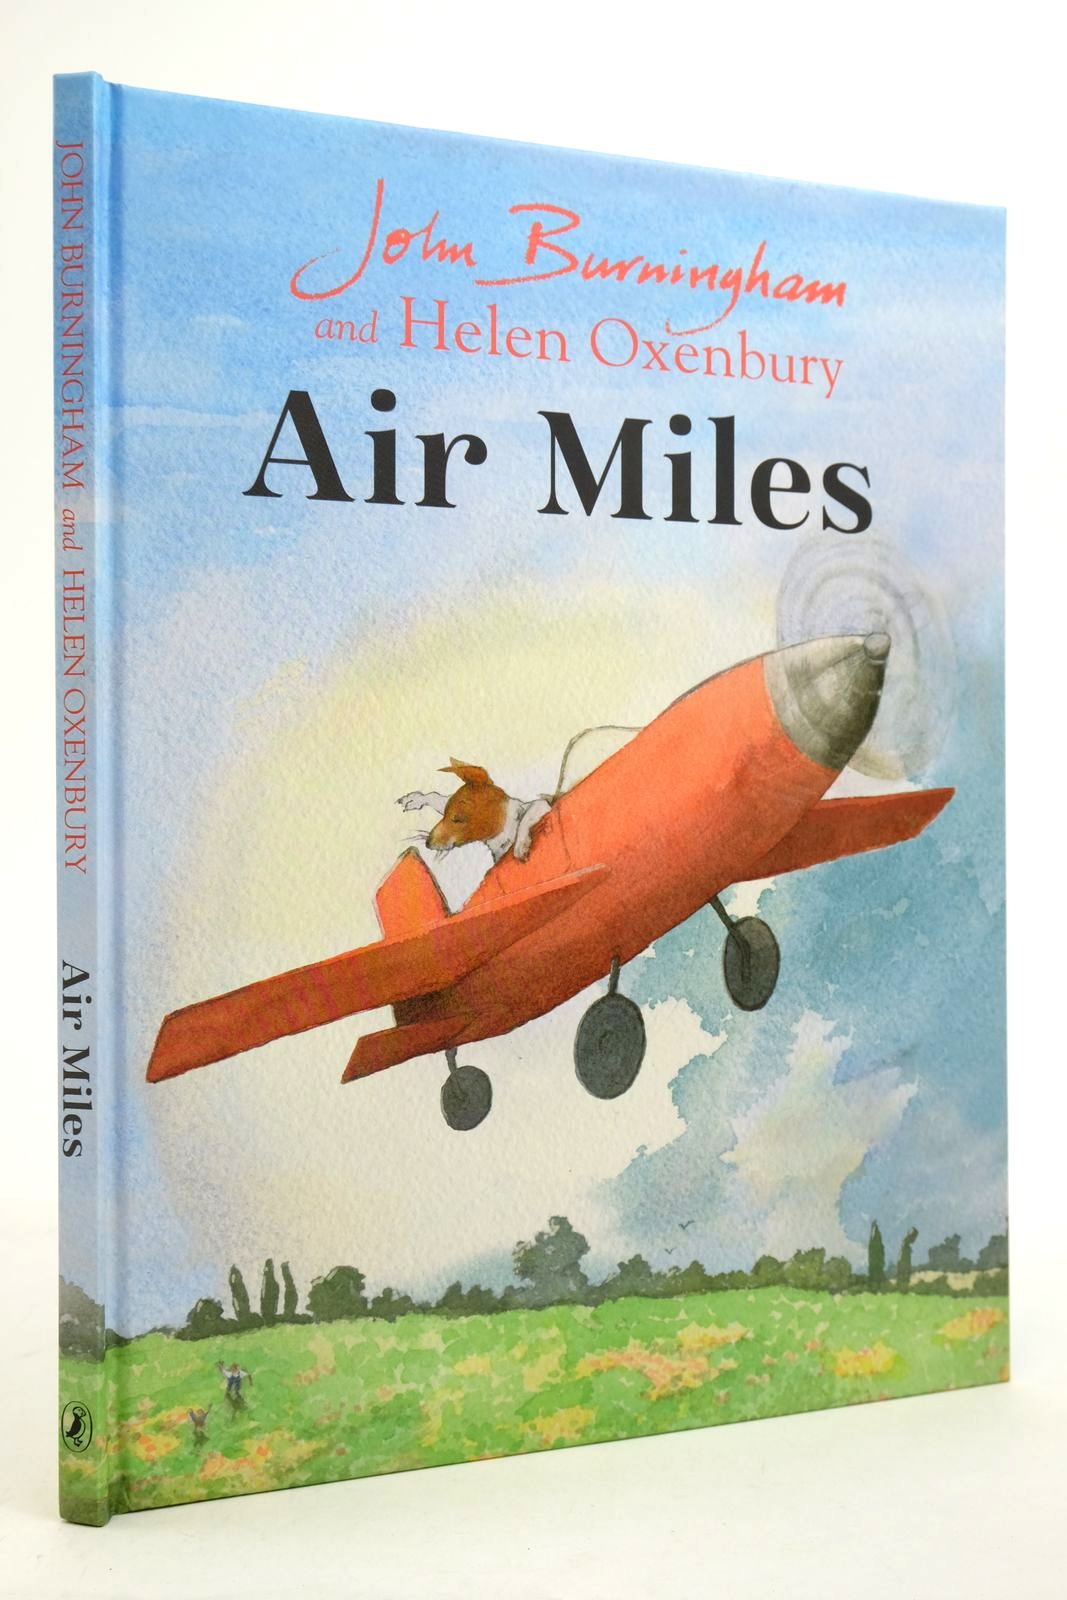 Photo of AIR MILES written by Salaman, Bill illustrated by Burningham, John Oxenbury, Helen published by Jonathan Cape (STOCK CODE: 2140323)  for sale by Stella & Rose's Books